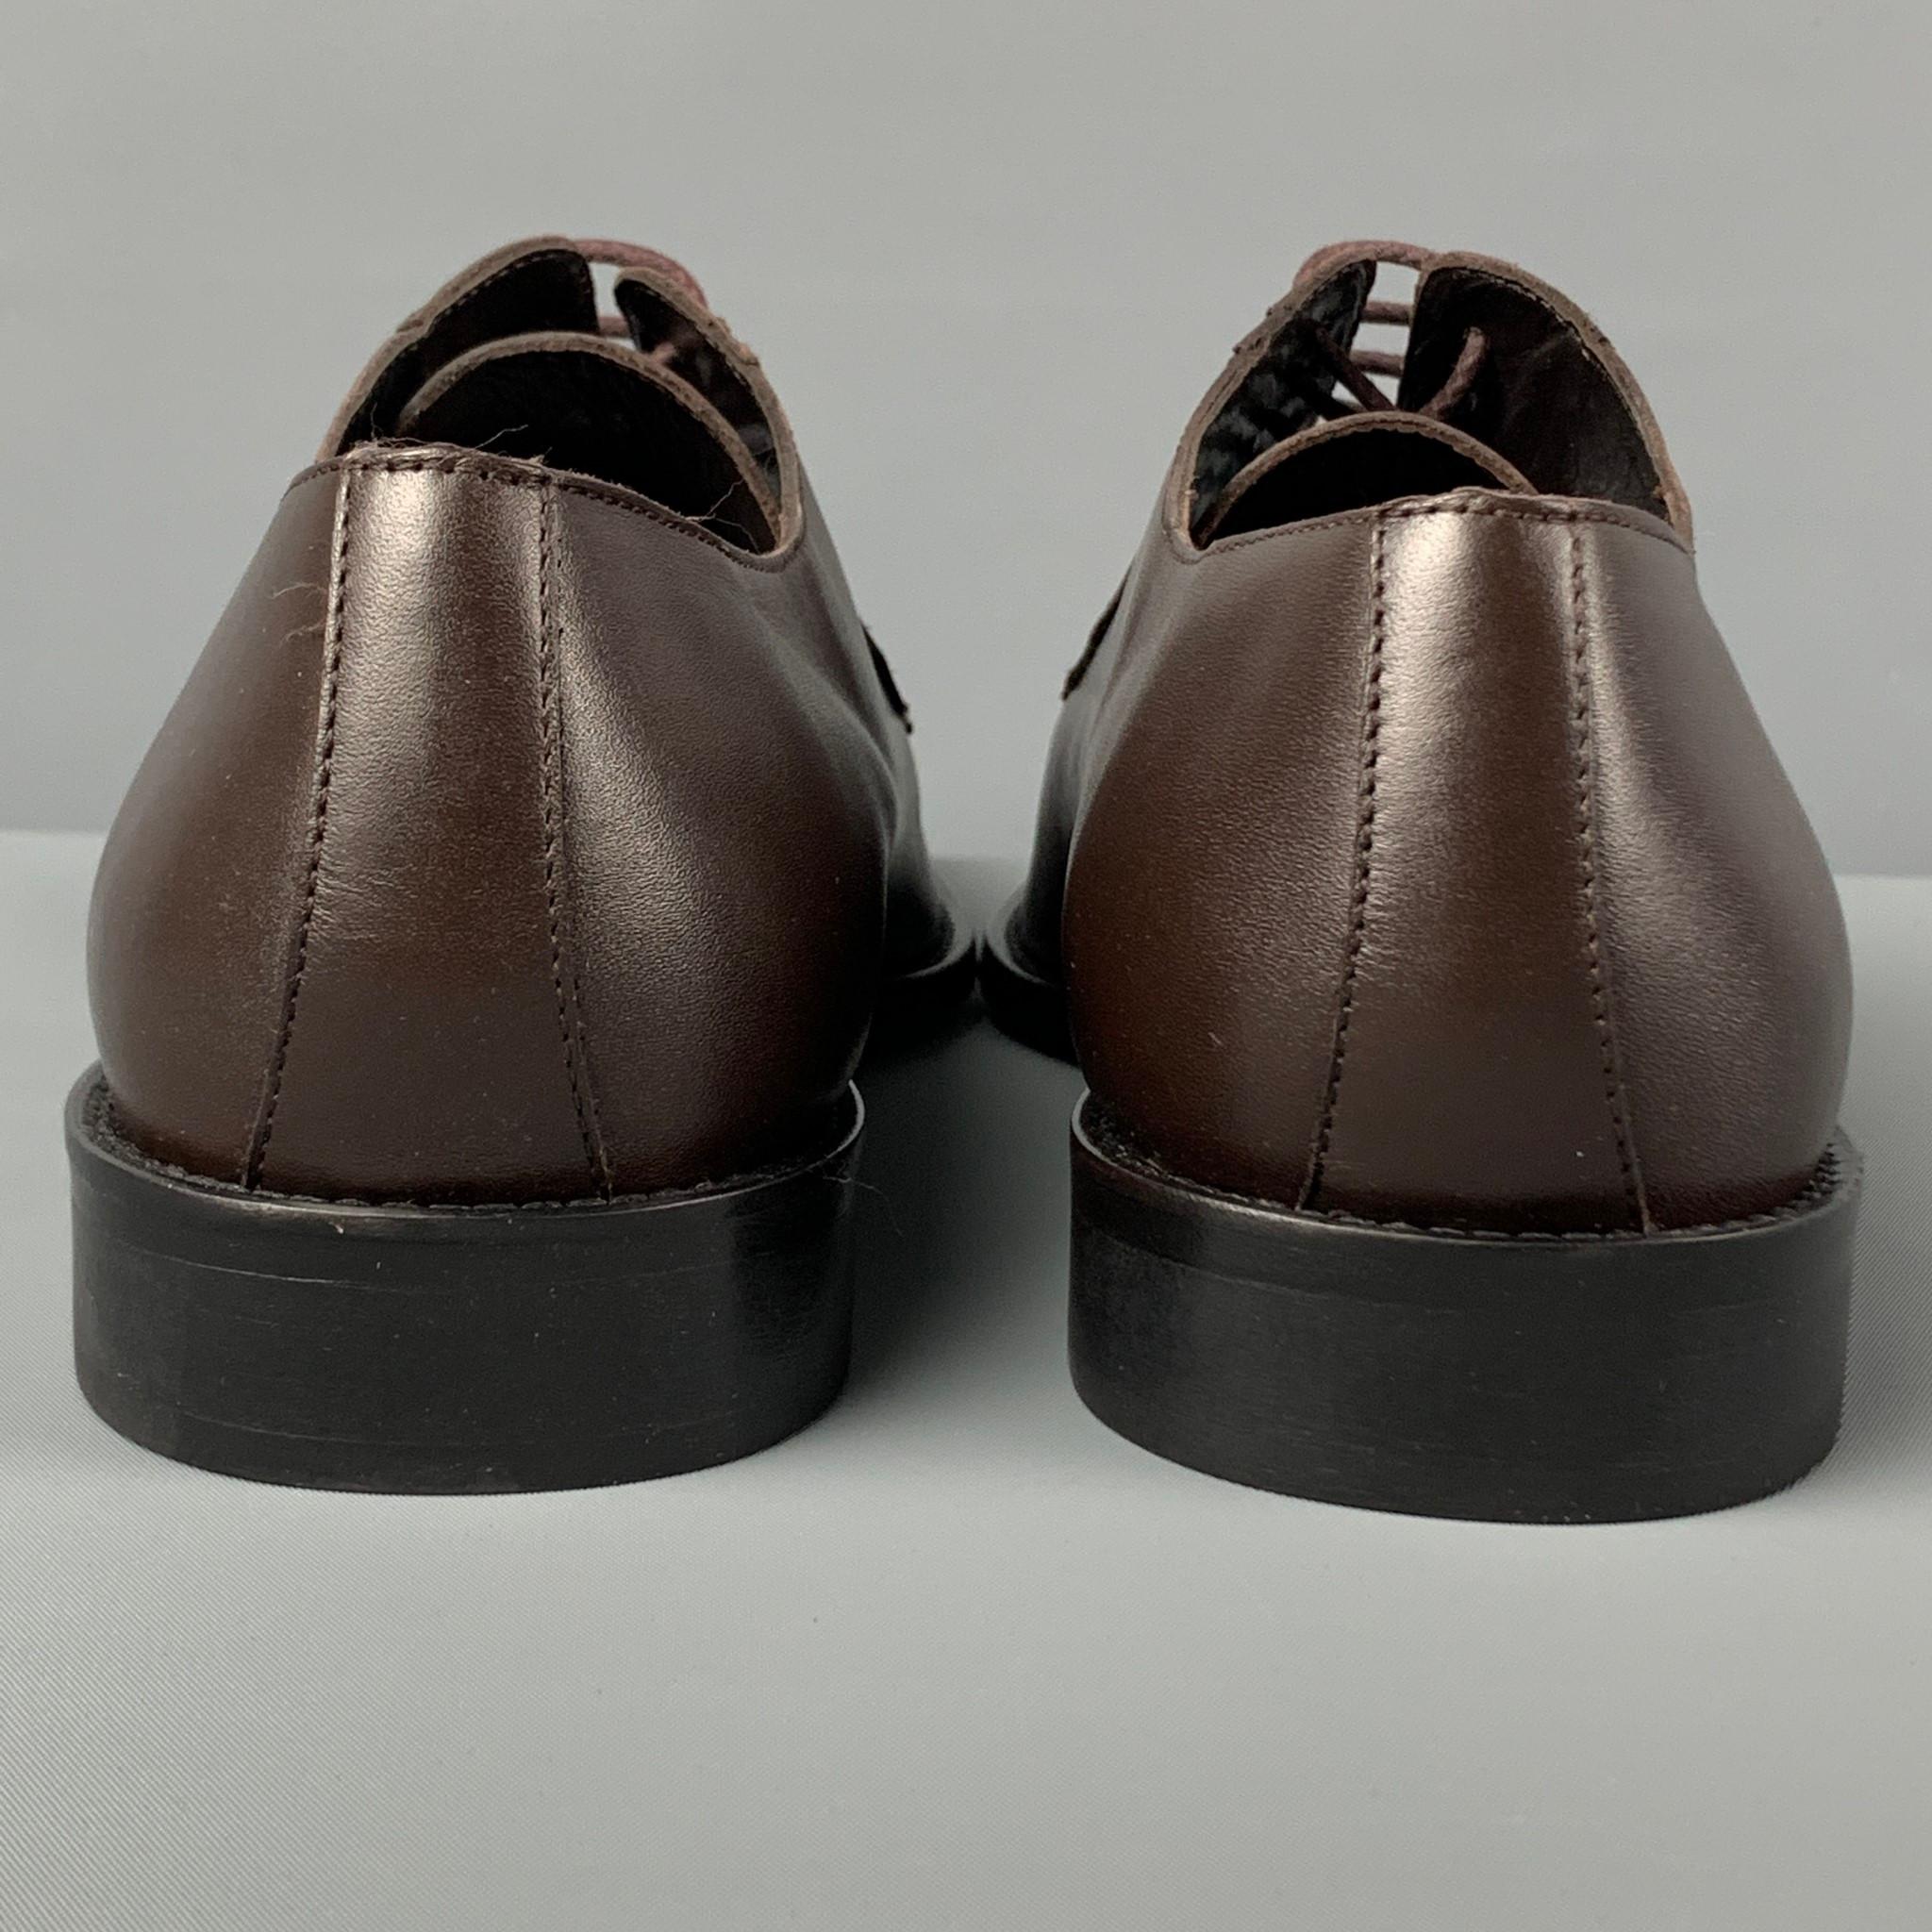 BRUNO MAGLI Size 10 Brown Leather Lace Up Shoes In Good Condition For Sale In San Francisco, CA